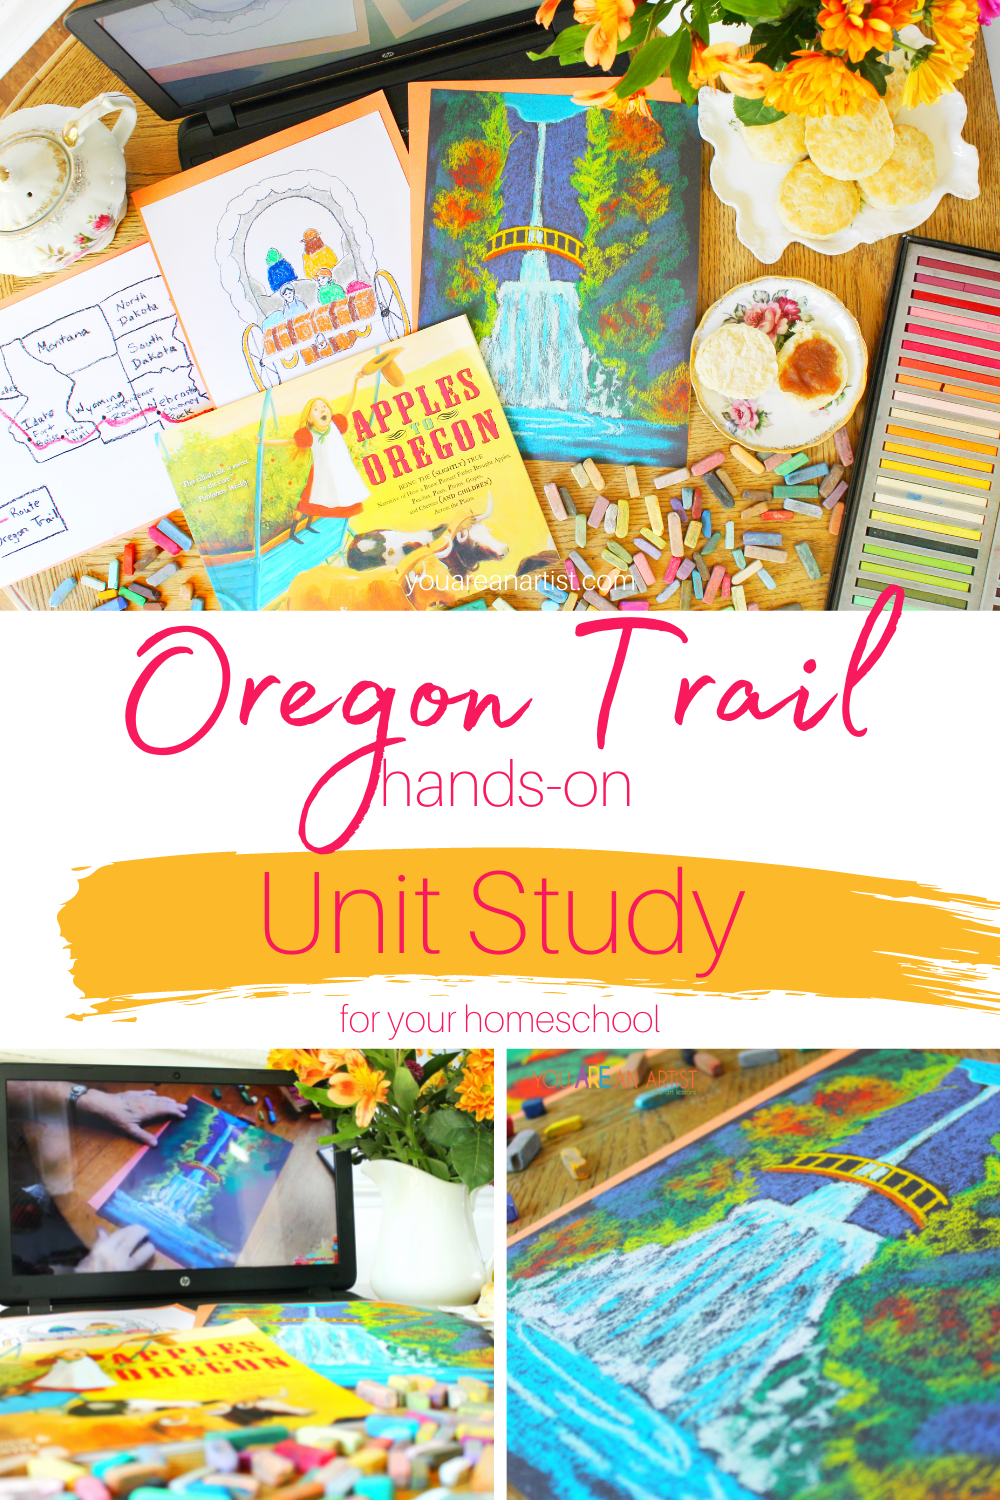 A Hands-On Oregon Trail Unit Study For Your Homeschool: You'll love these ideas for a hands-on Oregon Trail unit study for your kids. Homeschool history is much more enjoyable with books, art, maps, and more! #OregonTrail #OregonTrailunitstudy #OregonTraillessons #hands-onOregonTrail #homeschoolhistory #homeschool #chalkpastels #YouAREAnArtist